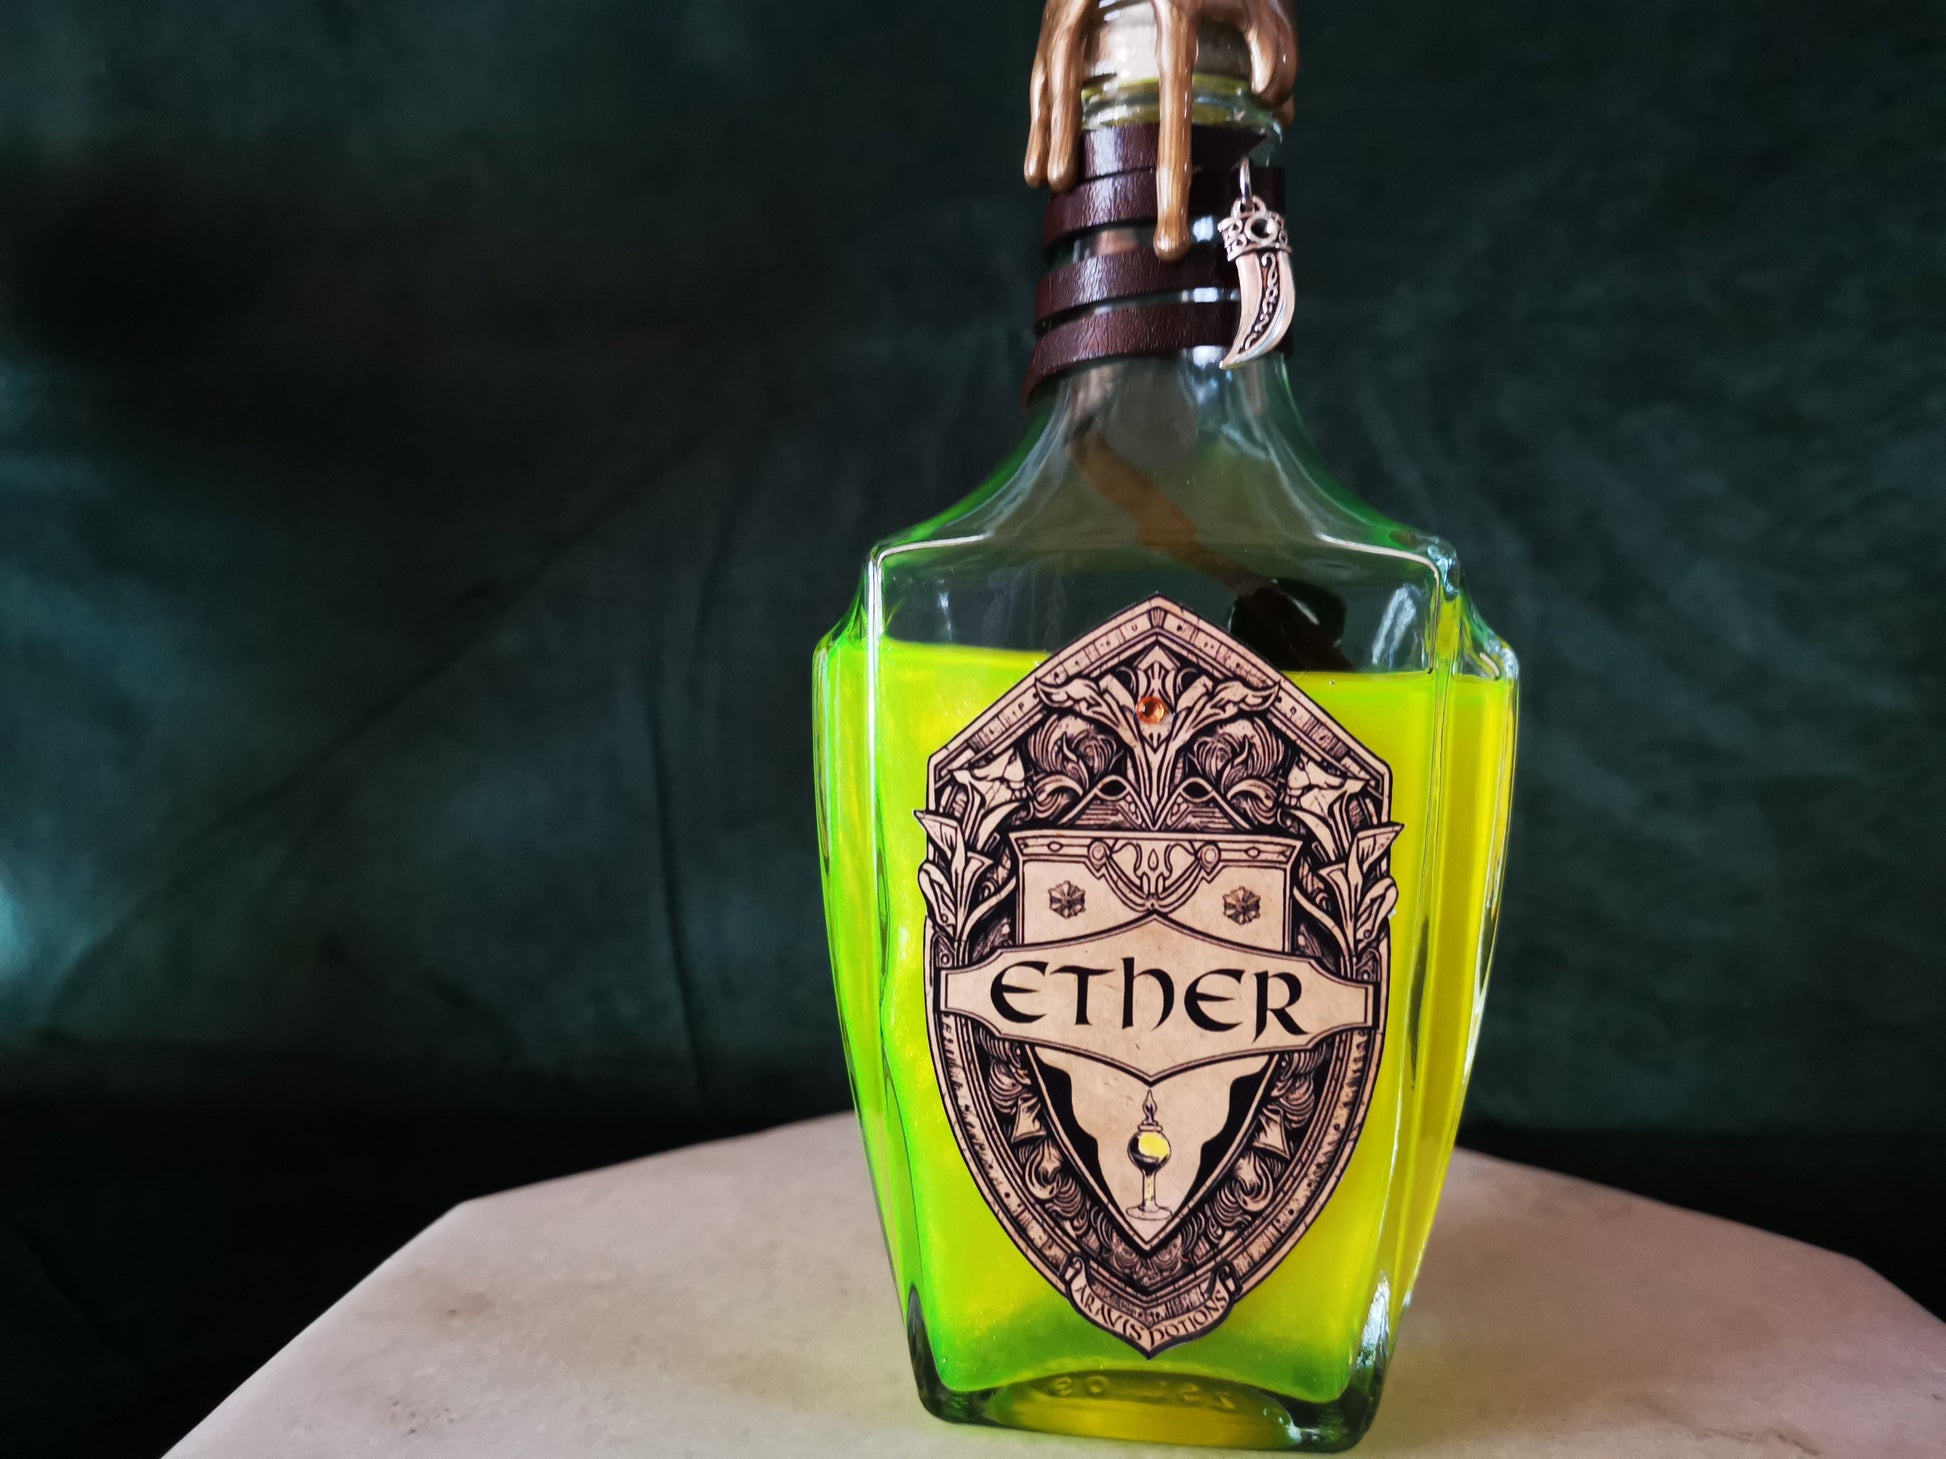 Ether - Final Fantasy Aravis Potions Apothecary Harry Potter